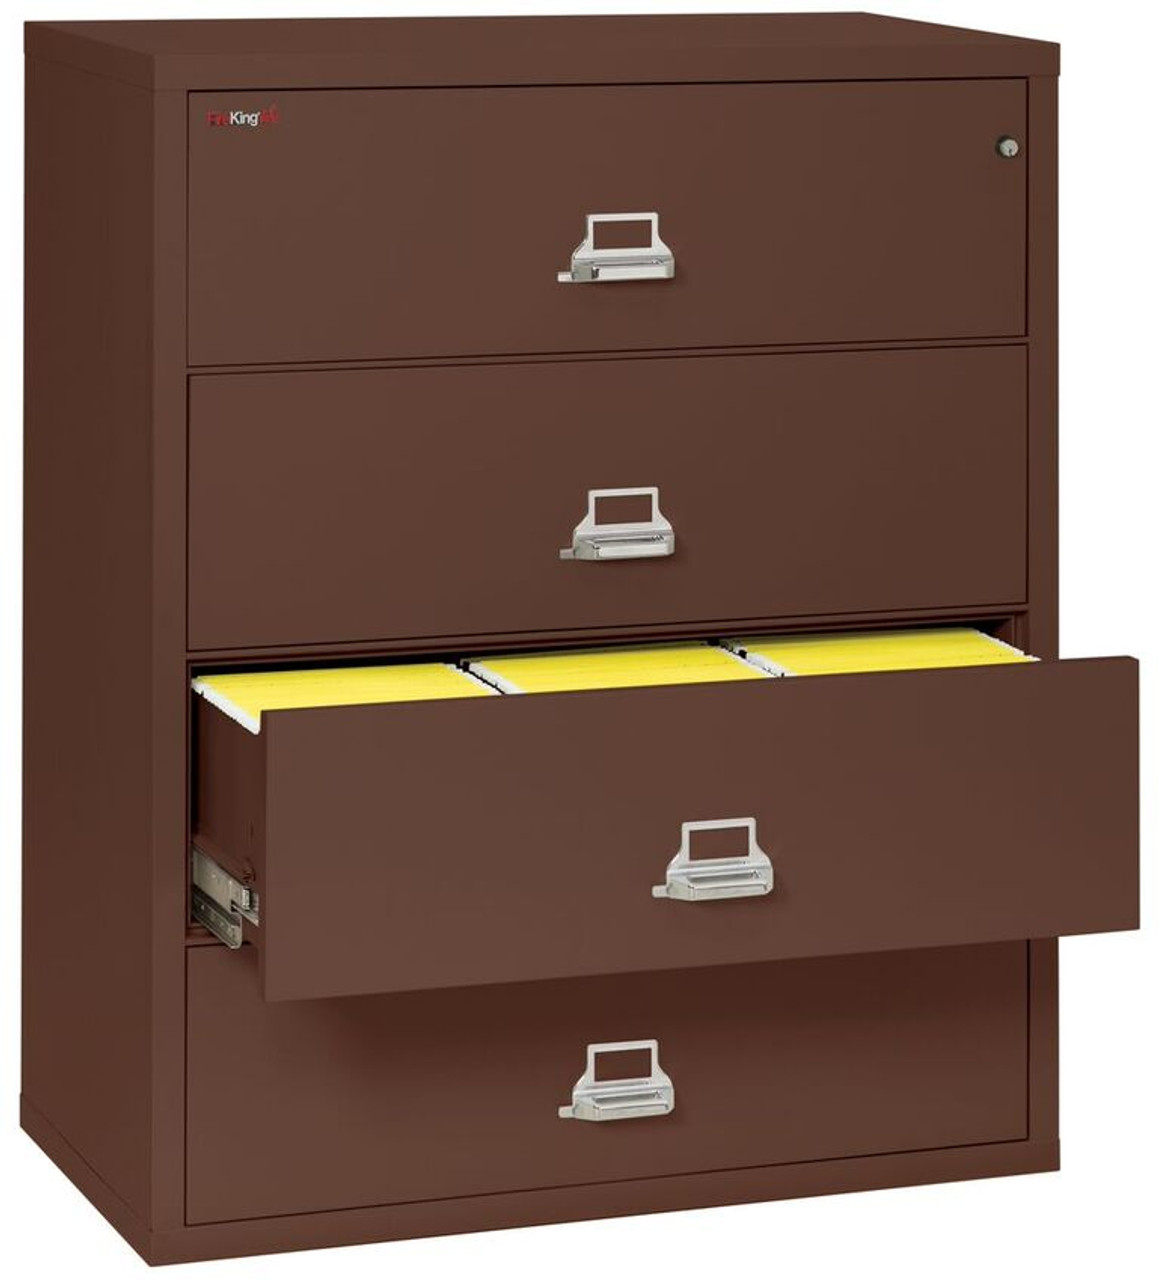 Fireking 4 4422 C Lateral File L Affordable Lateral File